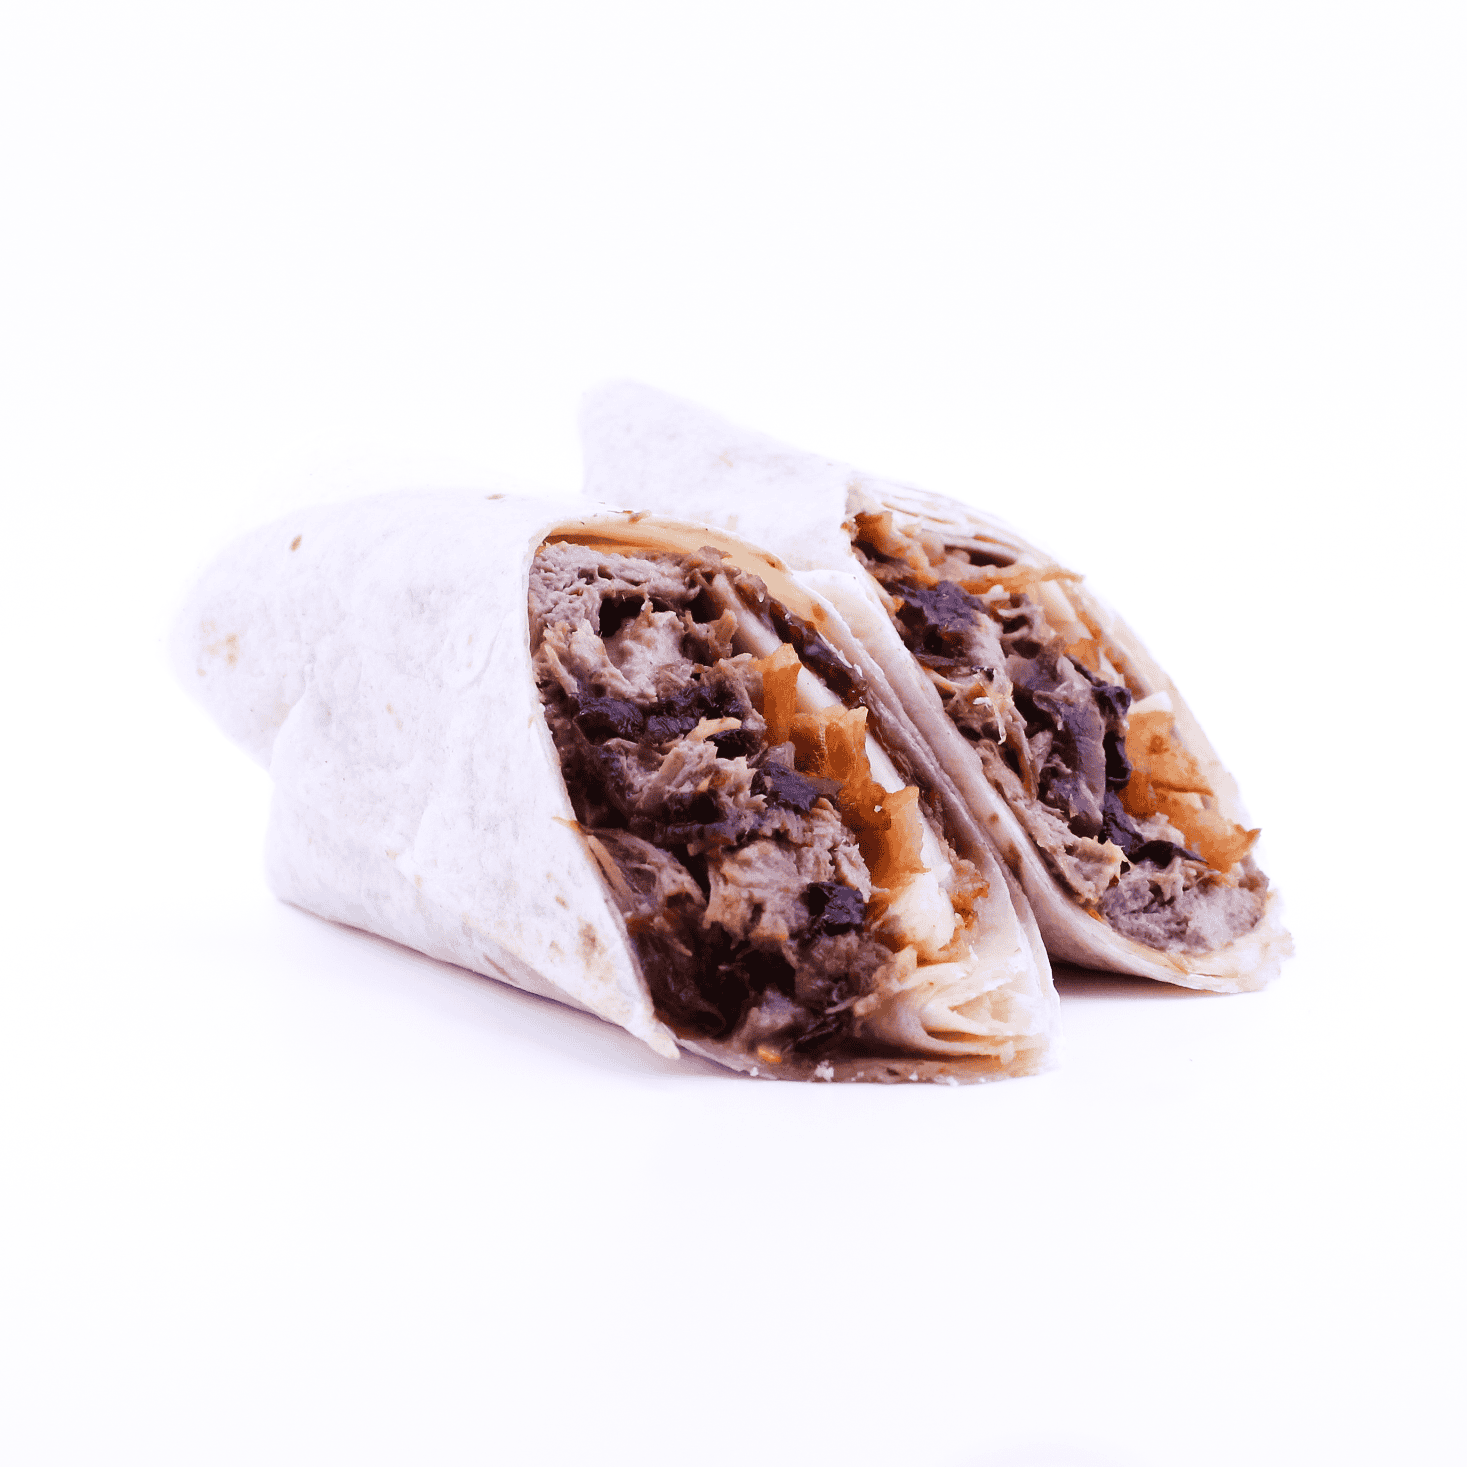 Slow roasted pork and onions, bacon, Cabot white cheddar cheese, spicy aioli, barbeque sauce wrapped in a flour tortilla